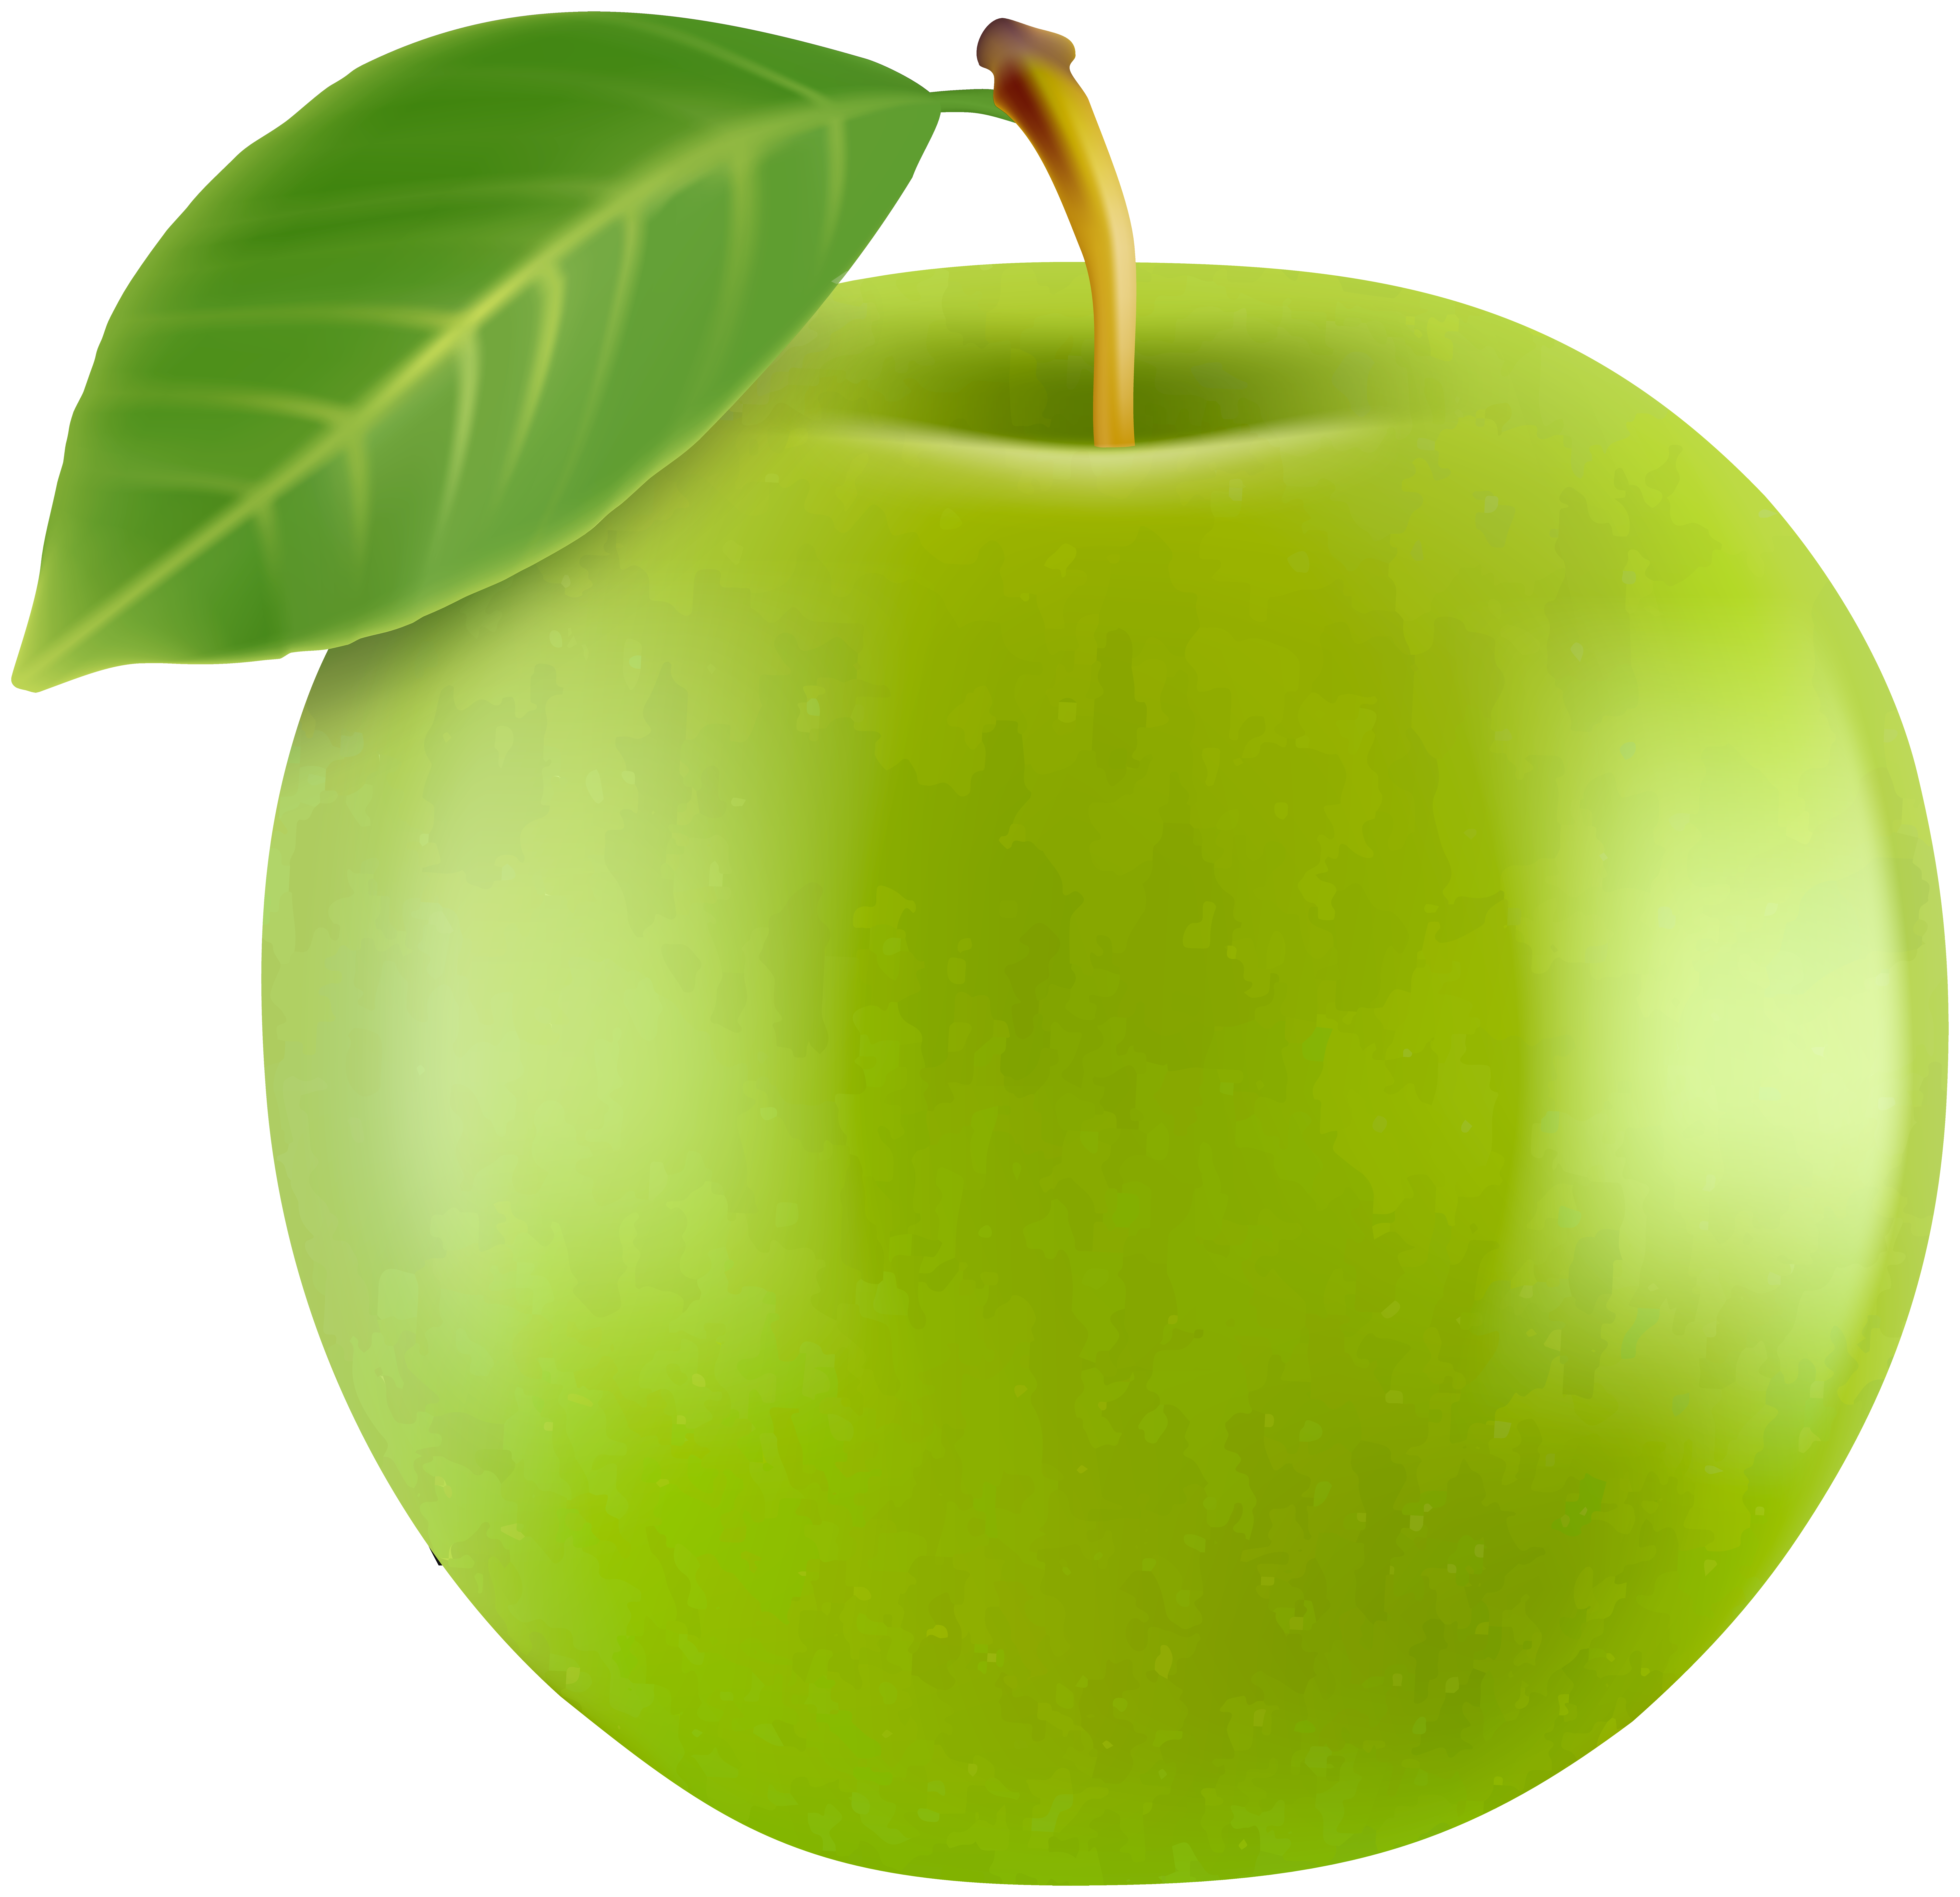 https://gallery.yopriceville.com/var/albums/Free-Clipart-Pictures/Fruit-PNG/Realistic_Green_Apple_PNG_Clipart.png?m=1574583174